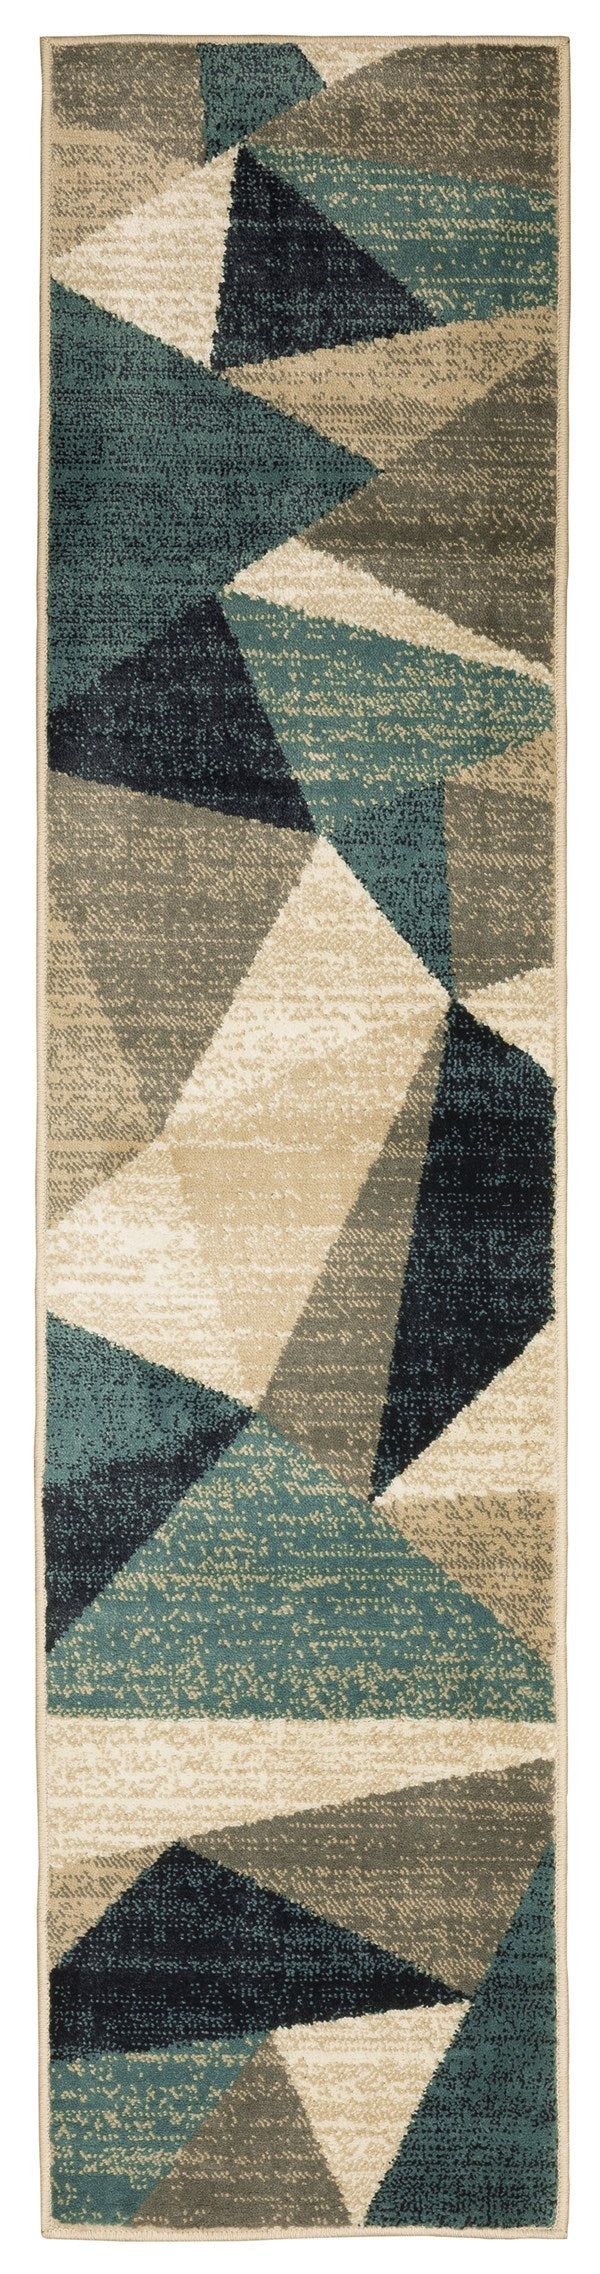 refined carpet rugs contemporary modern area rugs online rug store showroom orange county california handmade machine made loomed knotted rugs orange county california rug store near me refined carpet | rugs